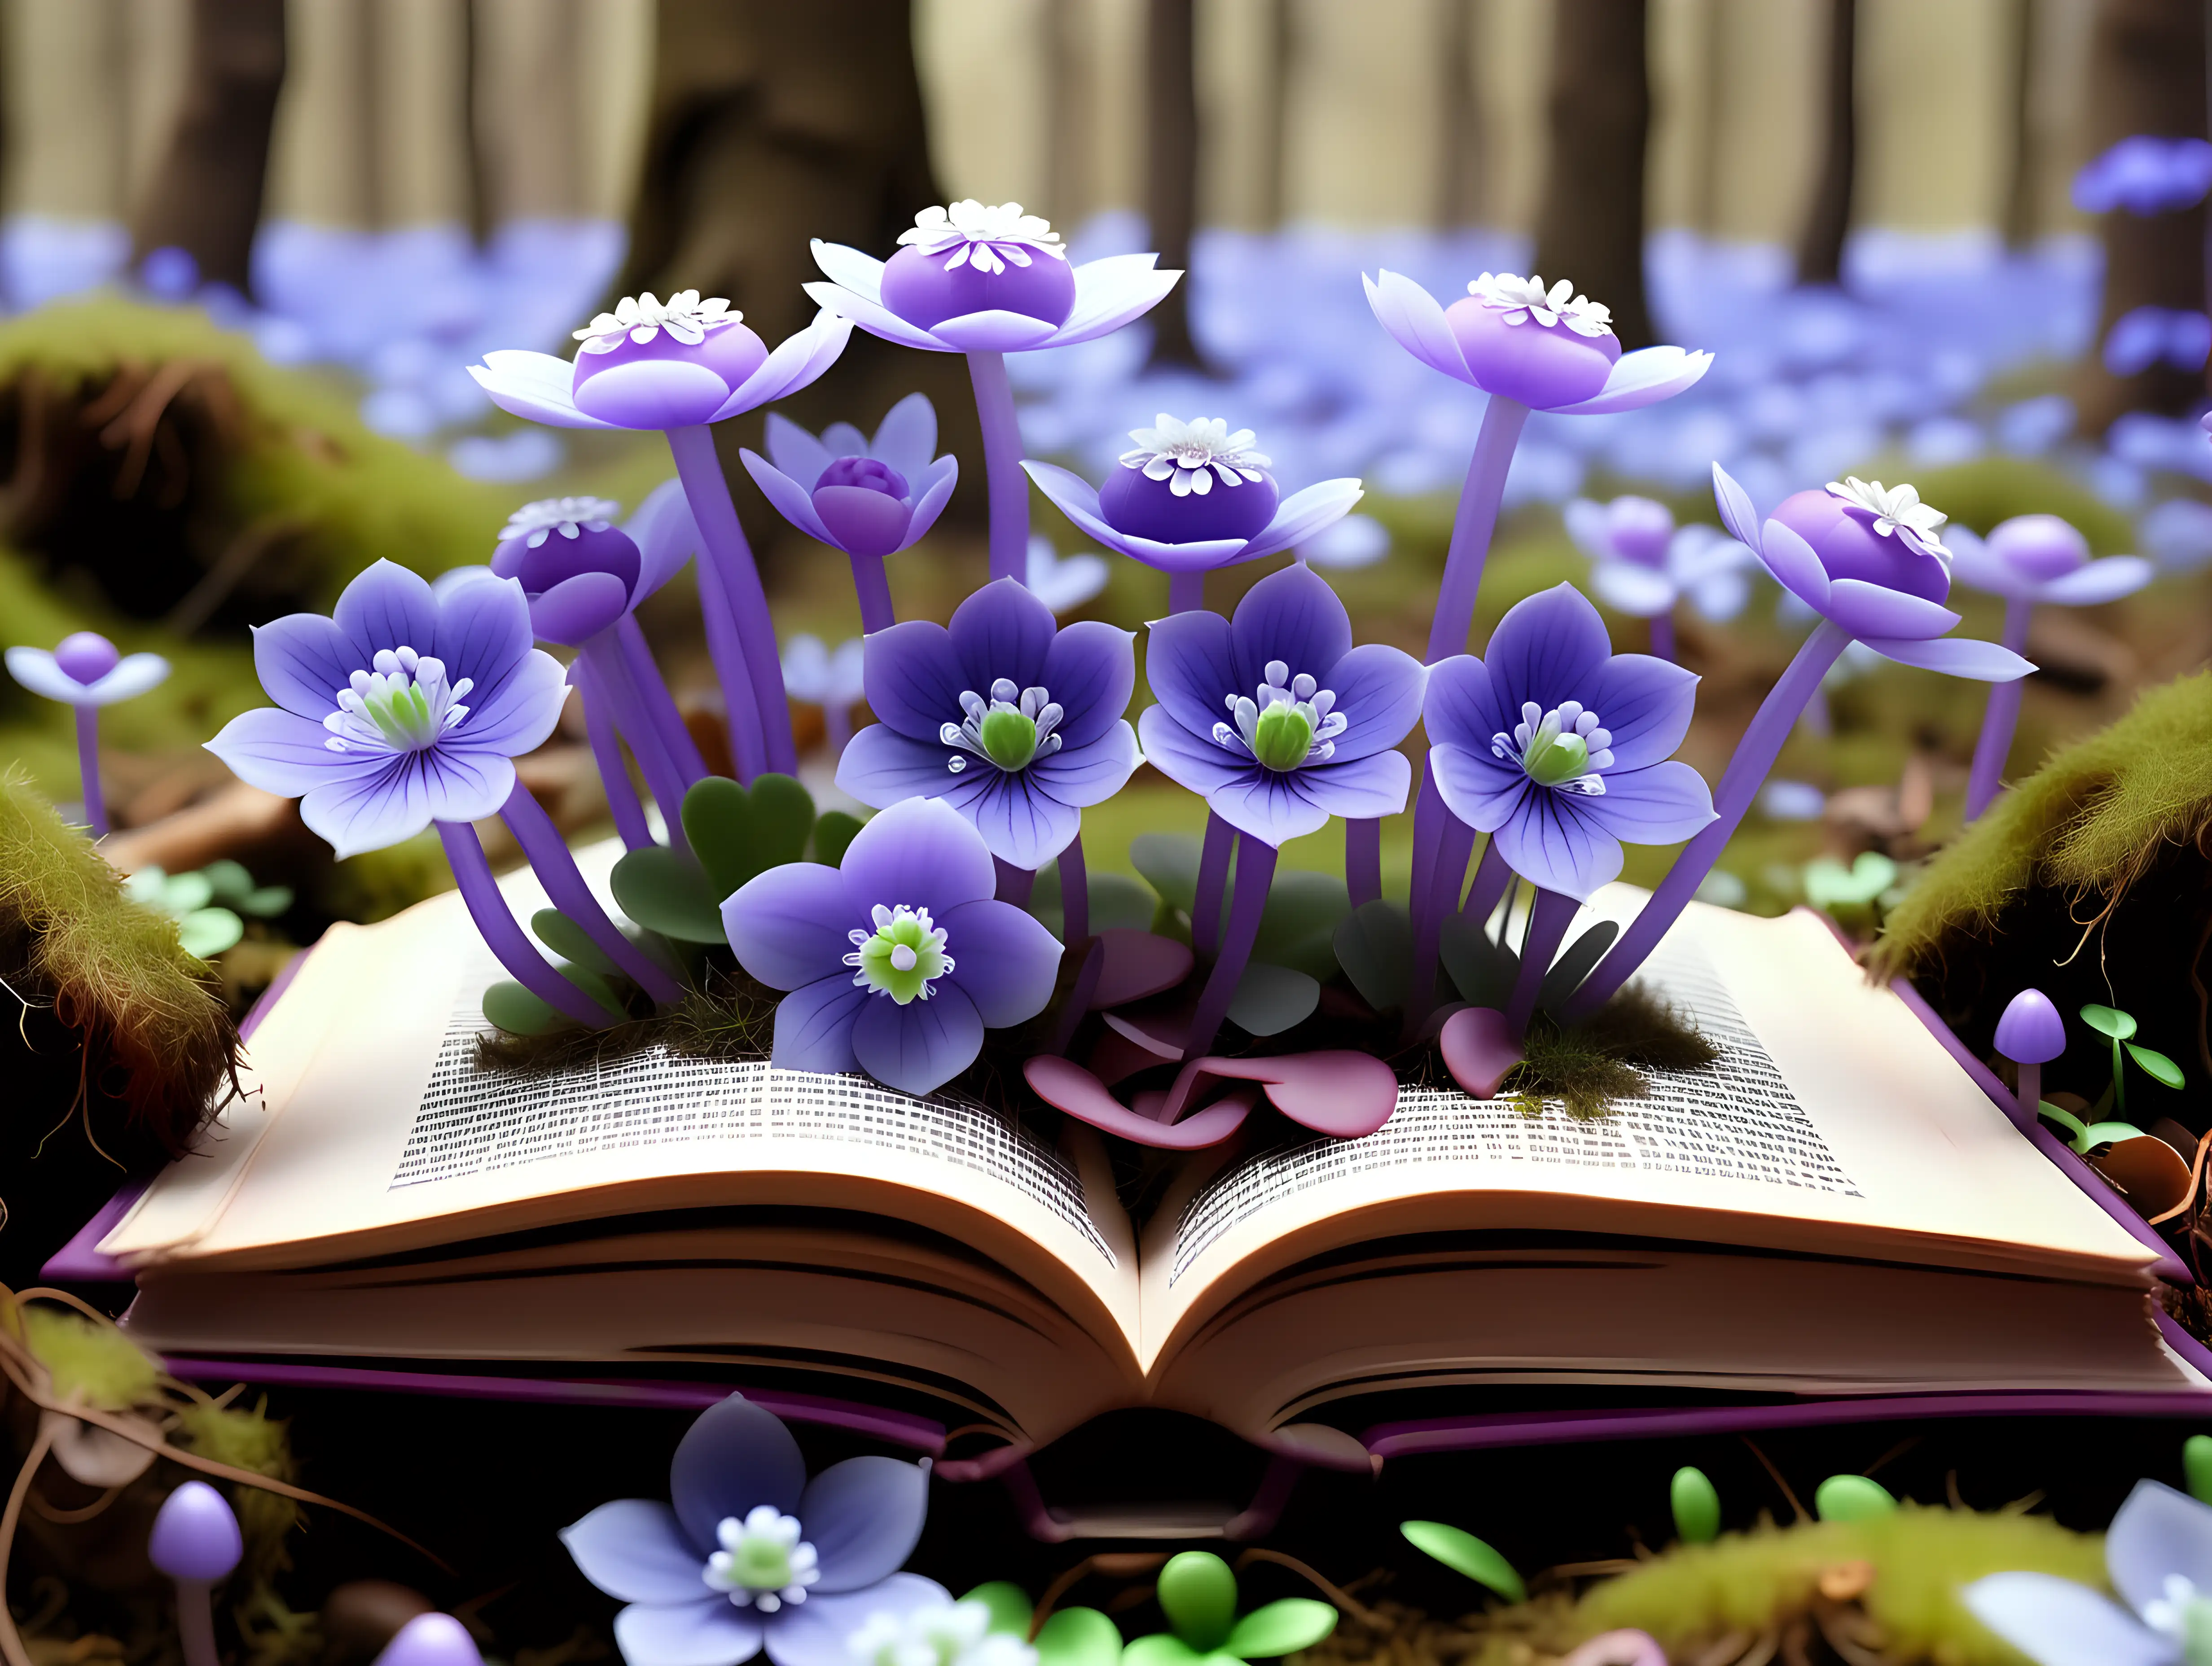 Enchanted Open Book Surrounded by Hepatica Flowers in a Spring Forest